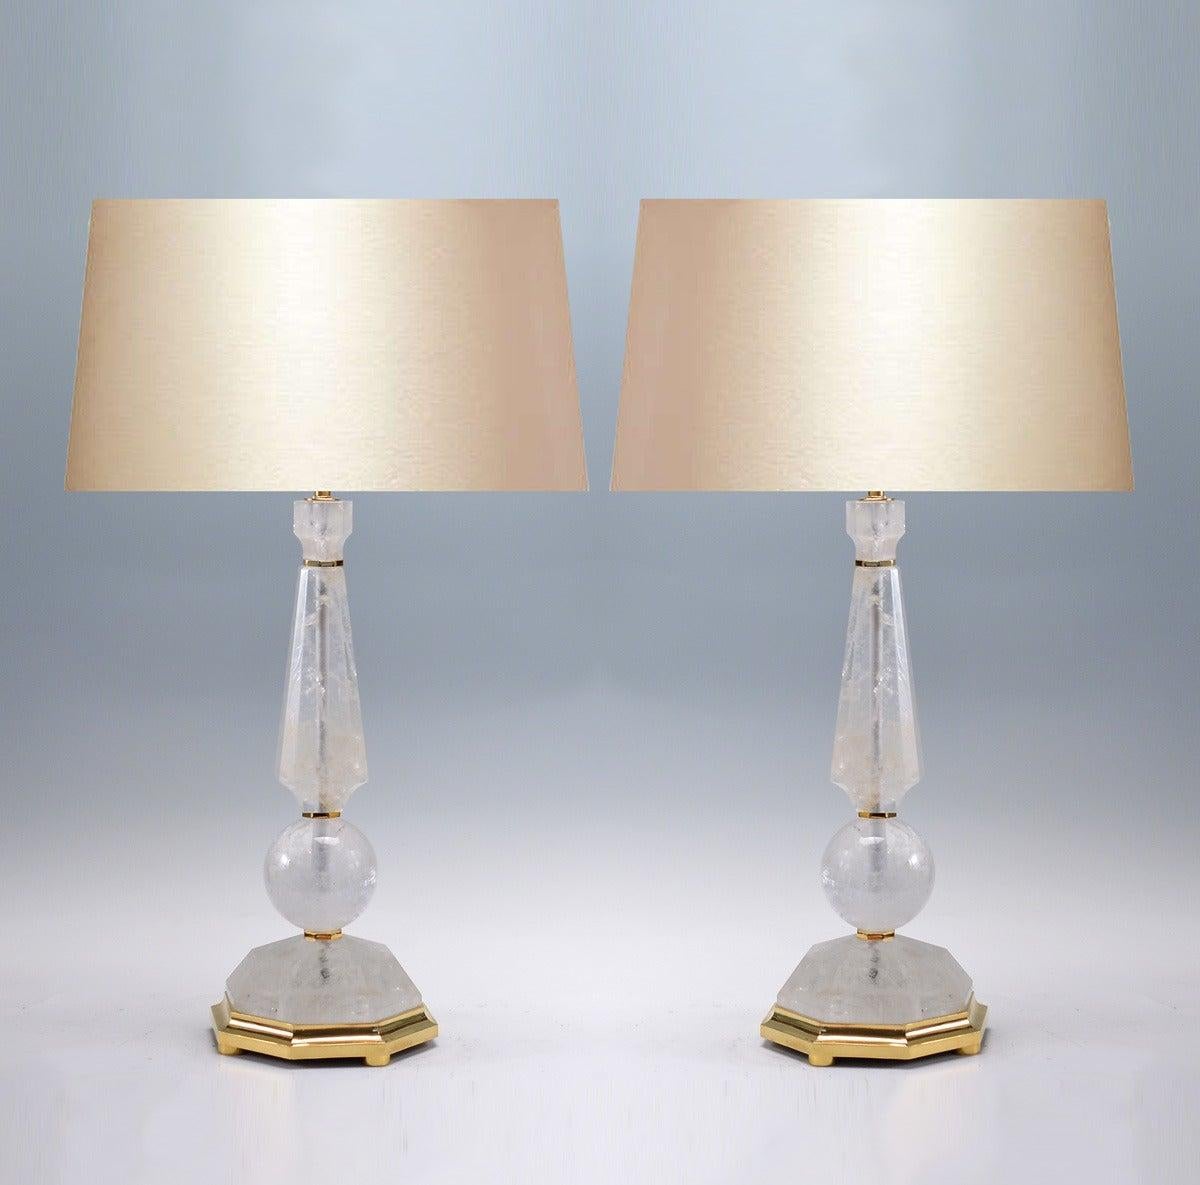 Pair of Prism and Globe Form Rock Crystal Quartz Lamps In Excellent Condition For Sale In New York, NY